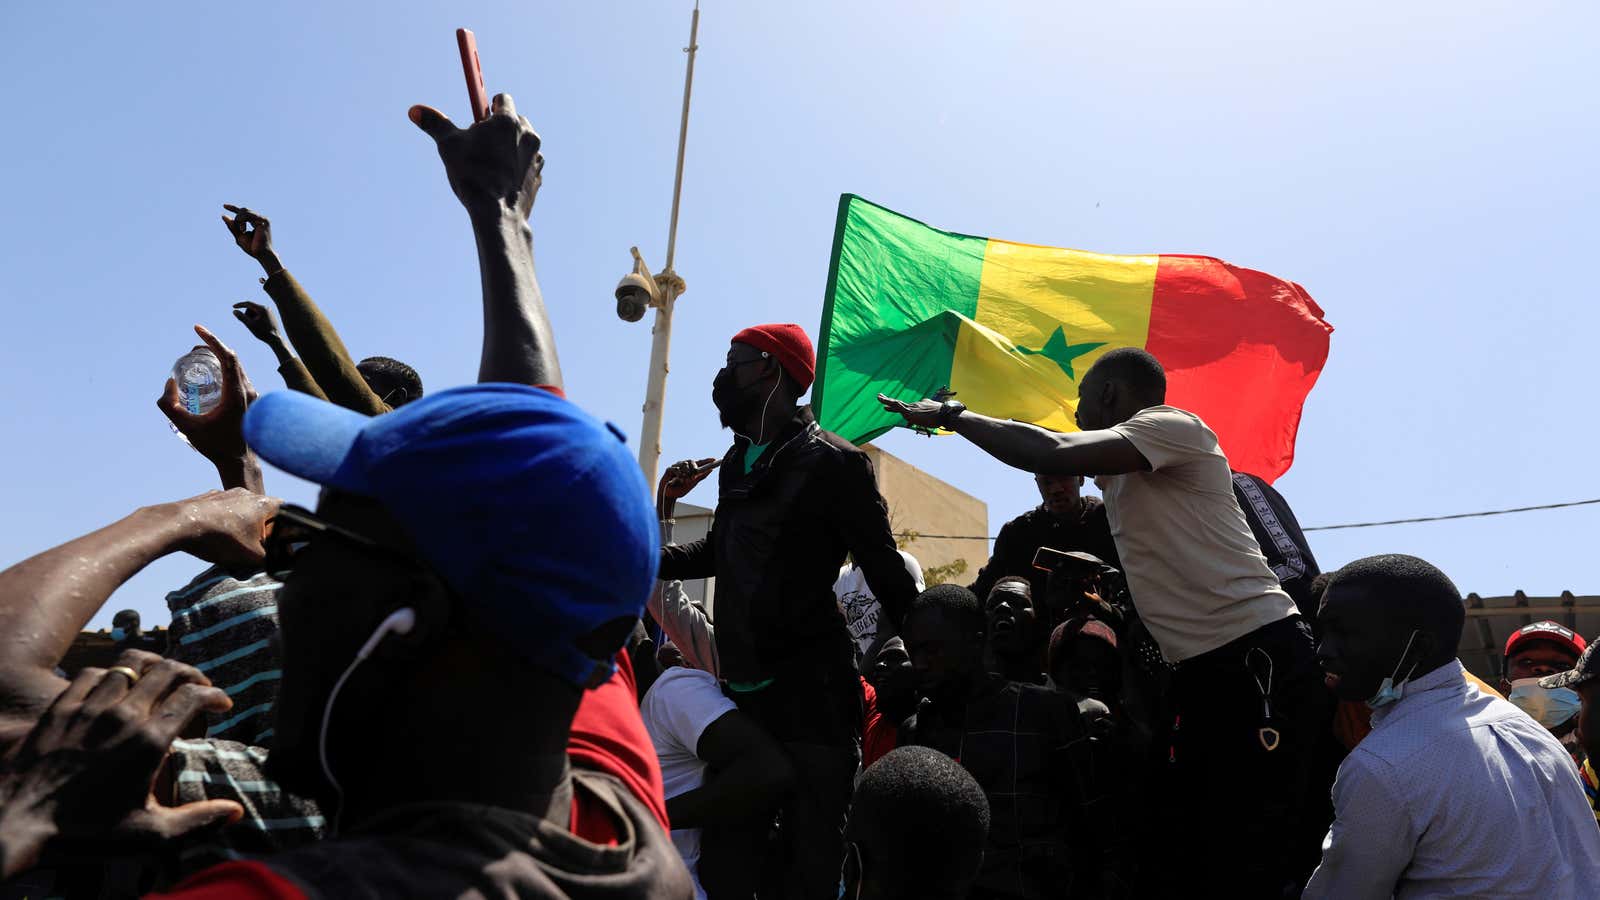 Supporters of opposition leader Ousmane Sonko, who was indicted and released on bail under judicial supervision, attend a demonstration in front of the court in Dakar on March 8.